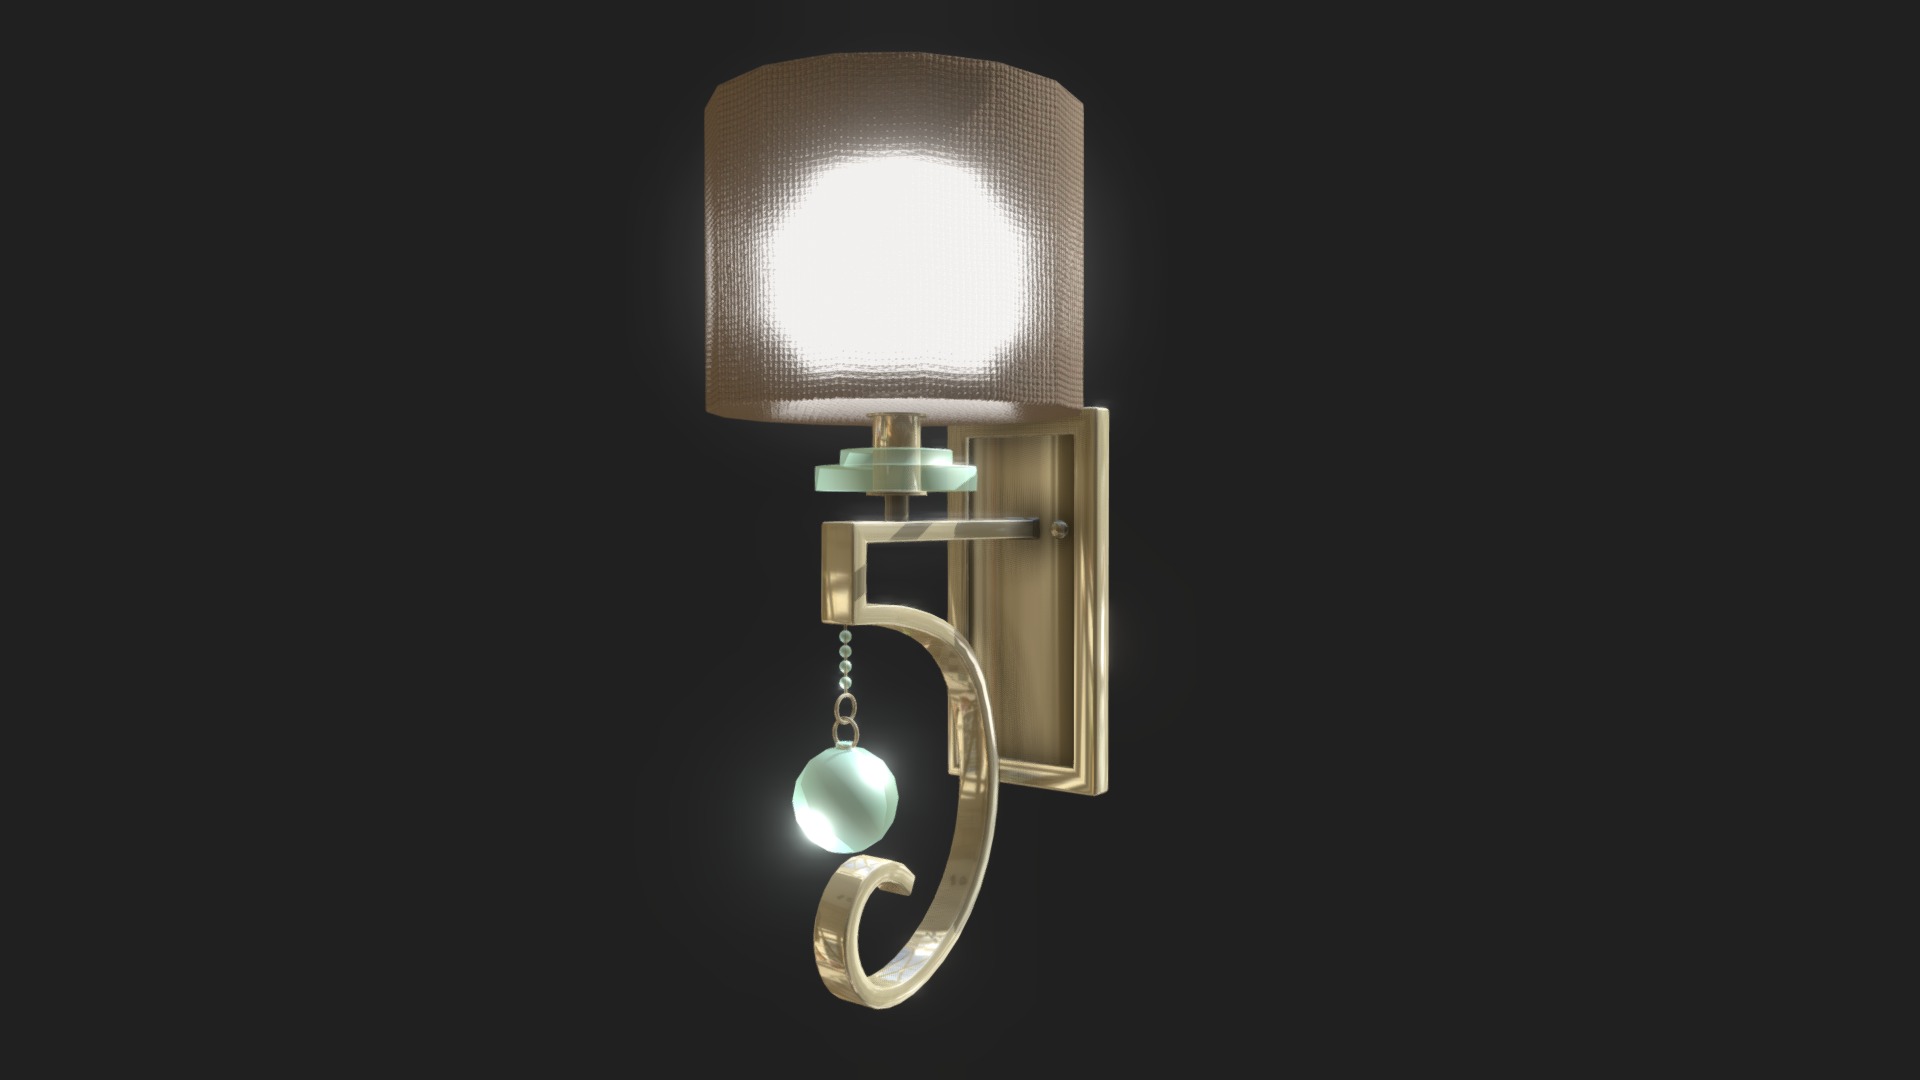 3D model HGPWL-07 - This is a 3D model of the HGPWL-07. The 3D model is about a light bulb with a blue light.